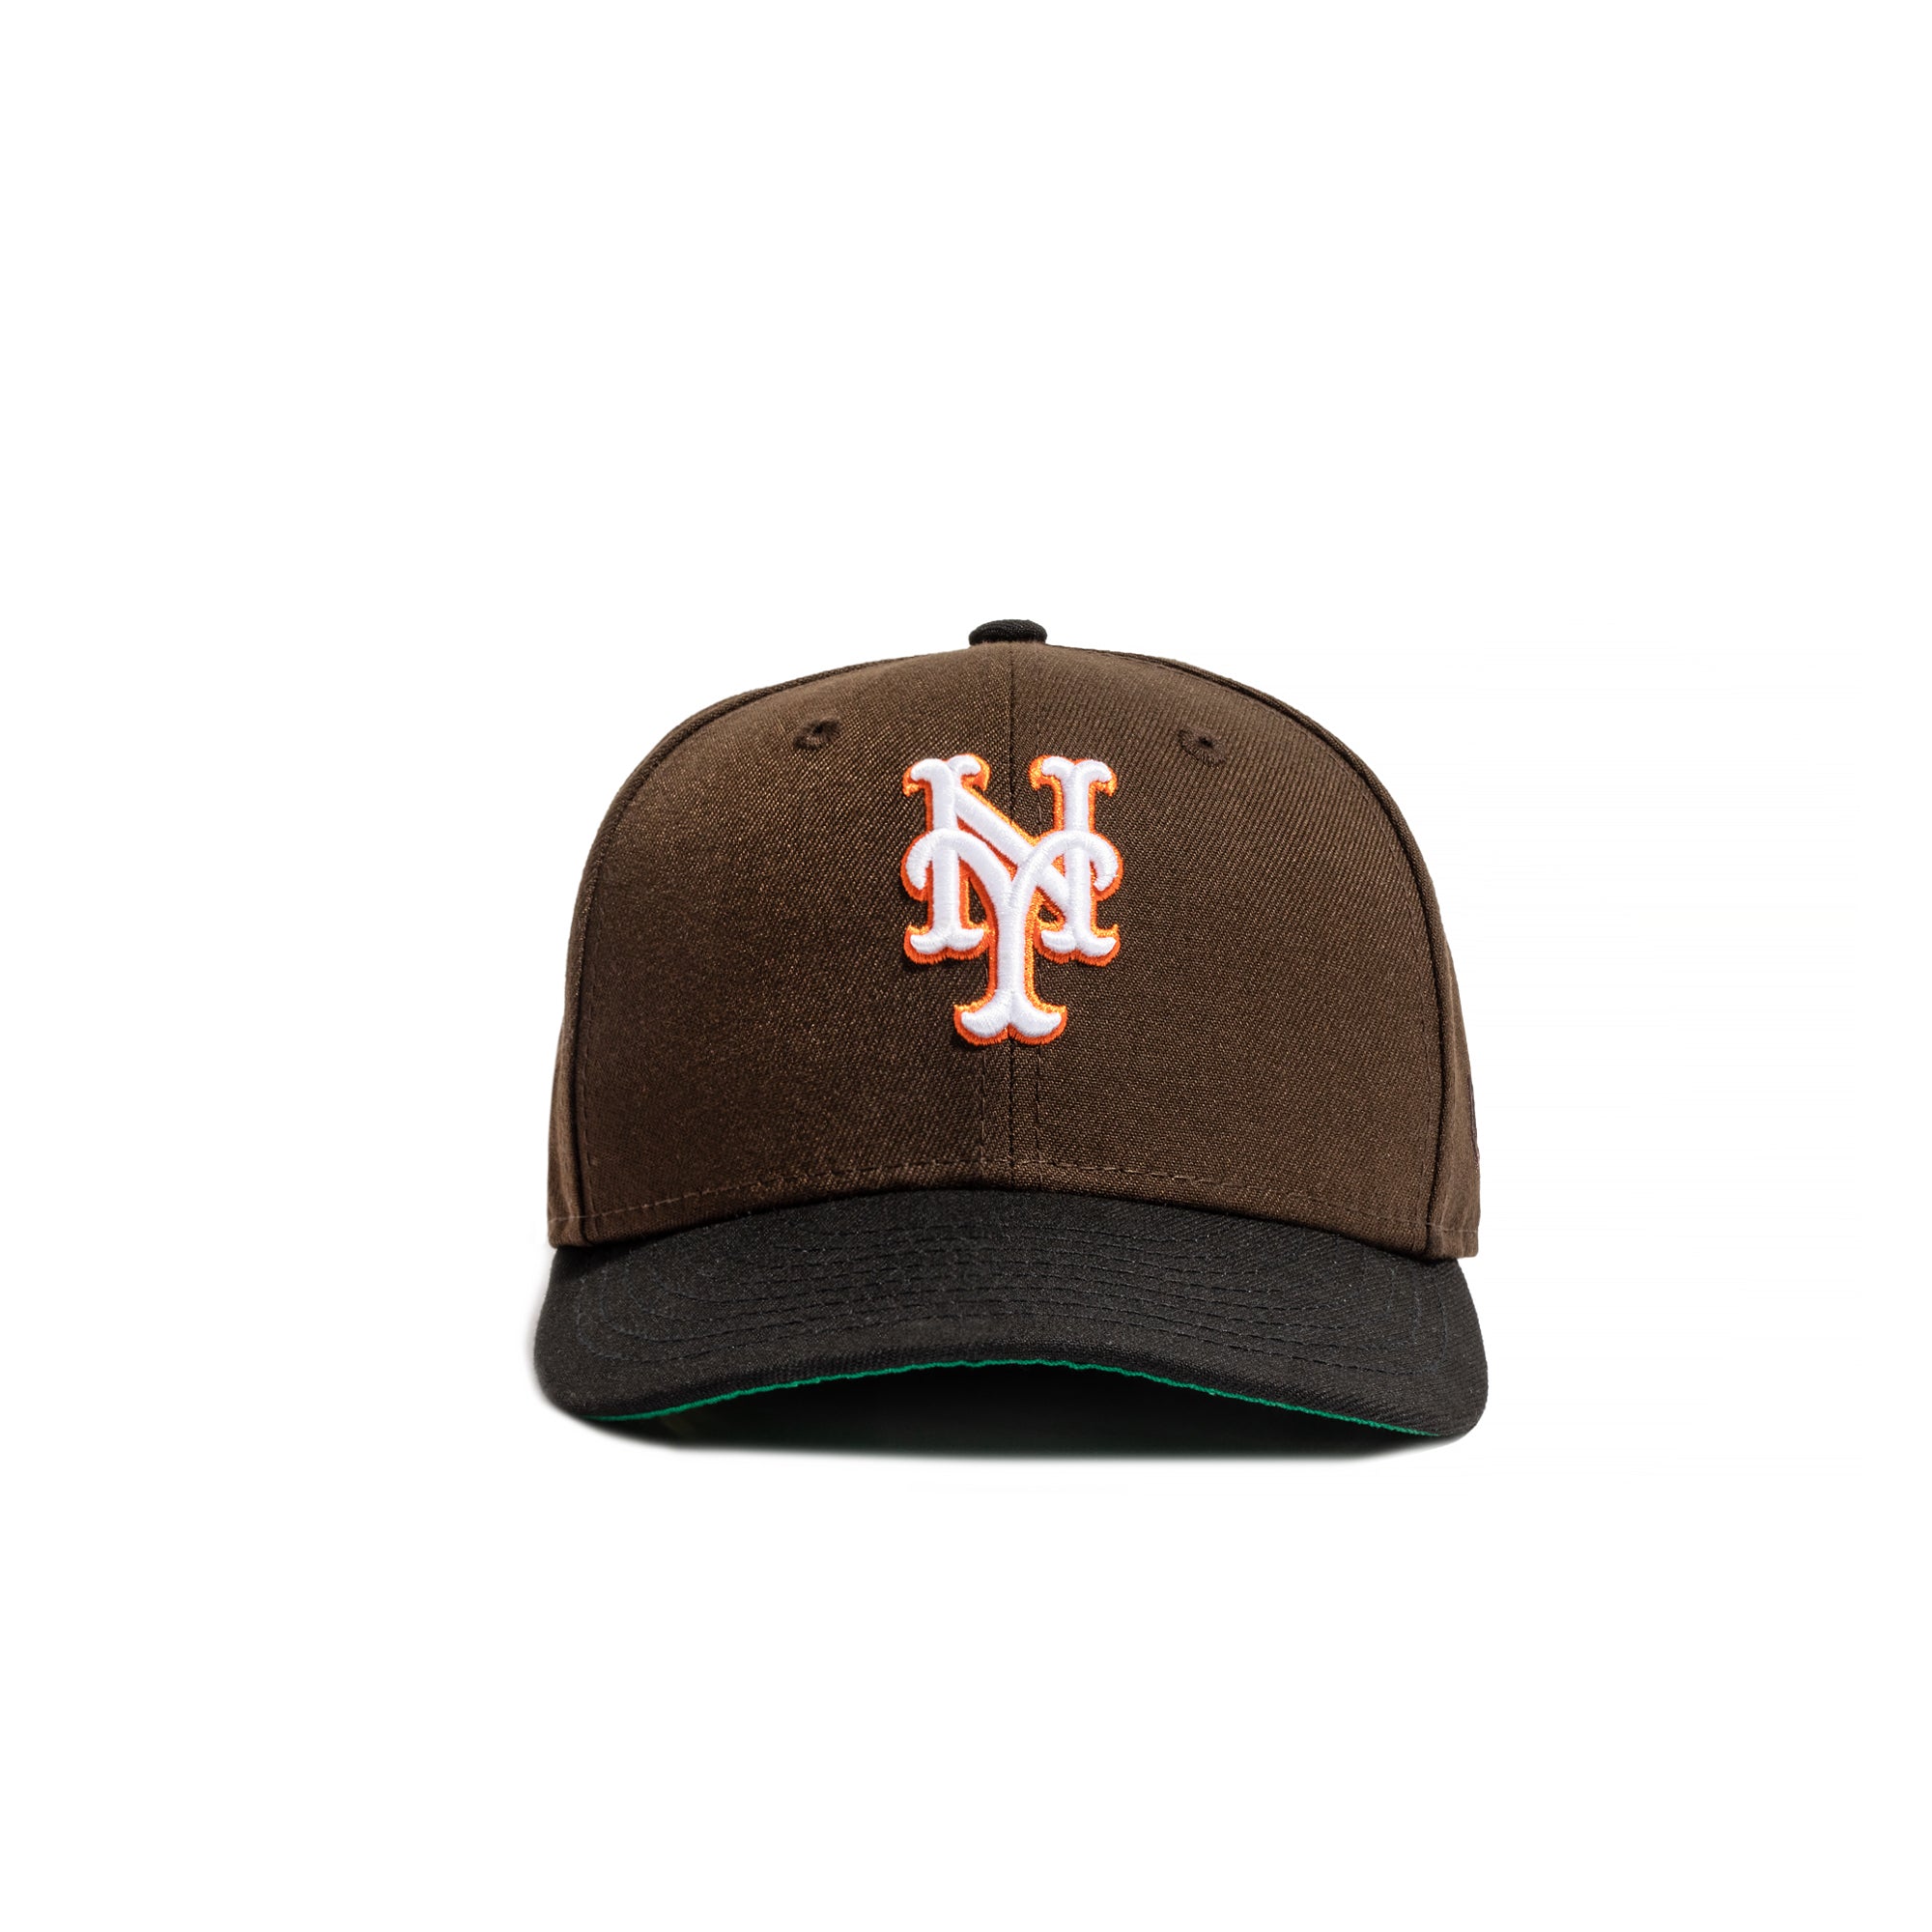 MLB Campus Fashion 59Fifty Fitted Hat Collection by MLB x New Era